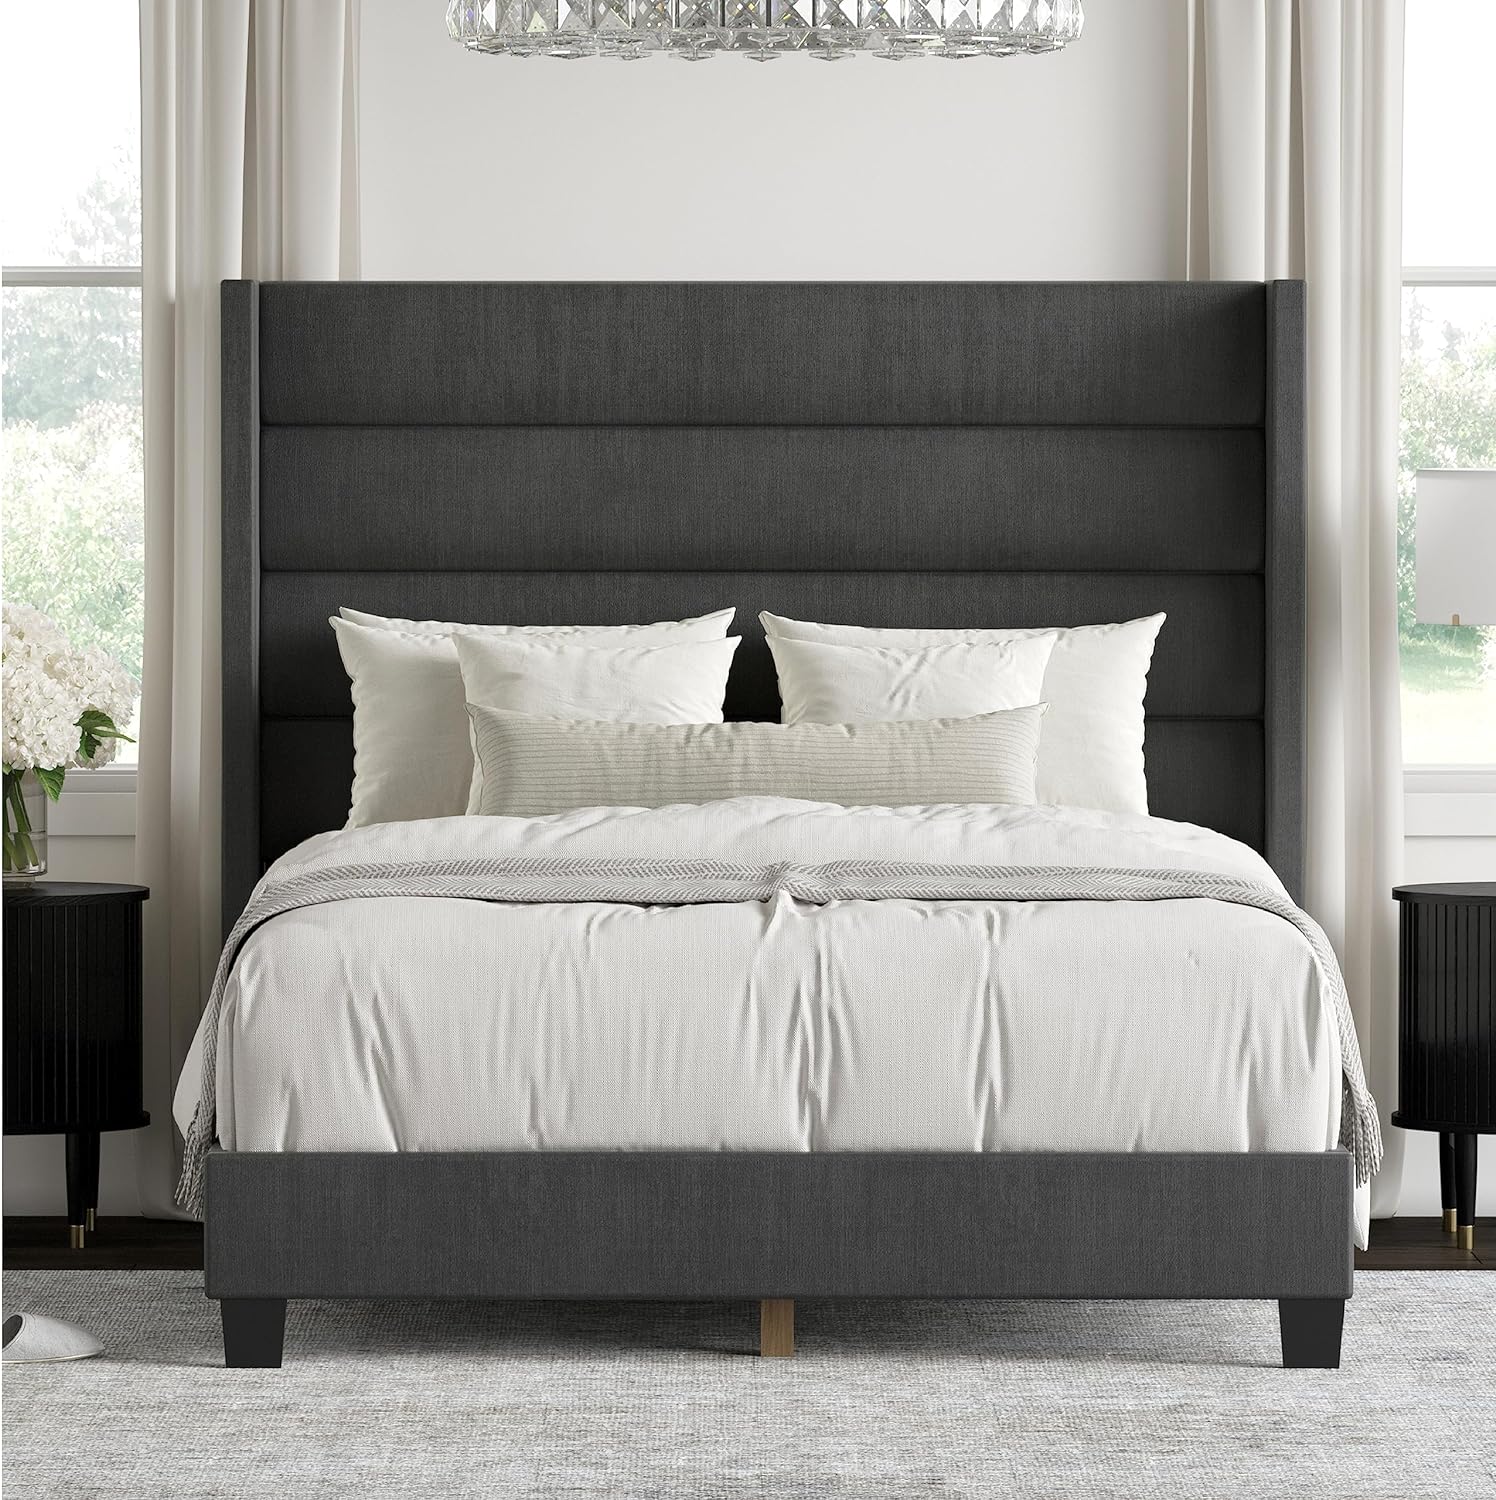 DG Casa George King Bed Frame - Charcoal Fabric Upholstered Panel Bed with Extra Tall Headboard - image 1 of 7